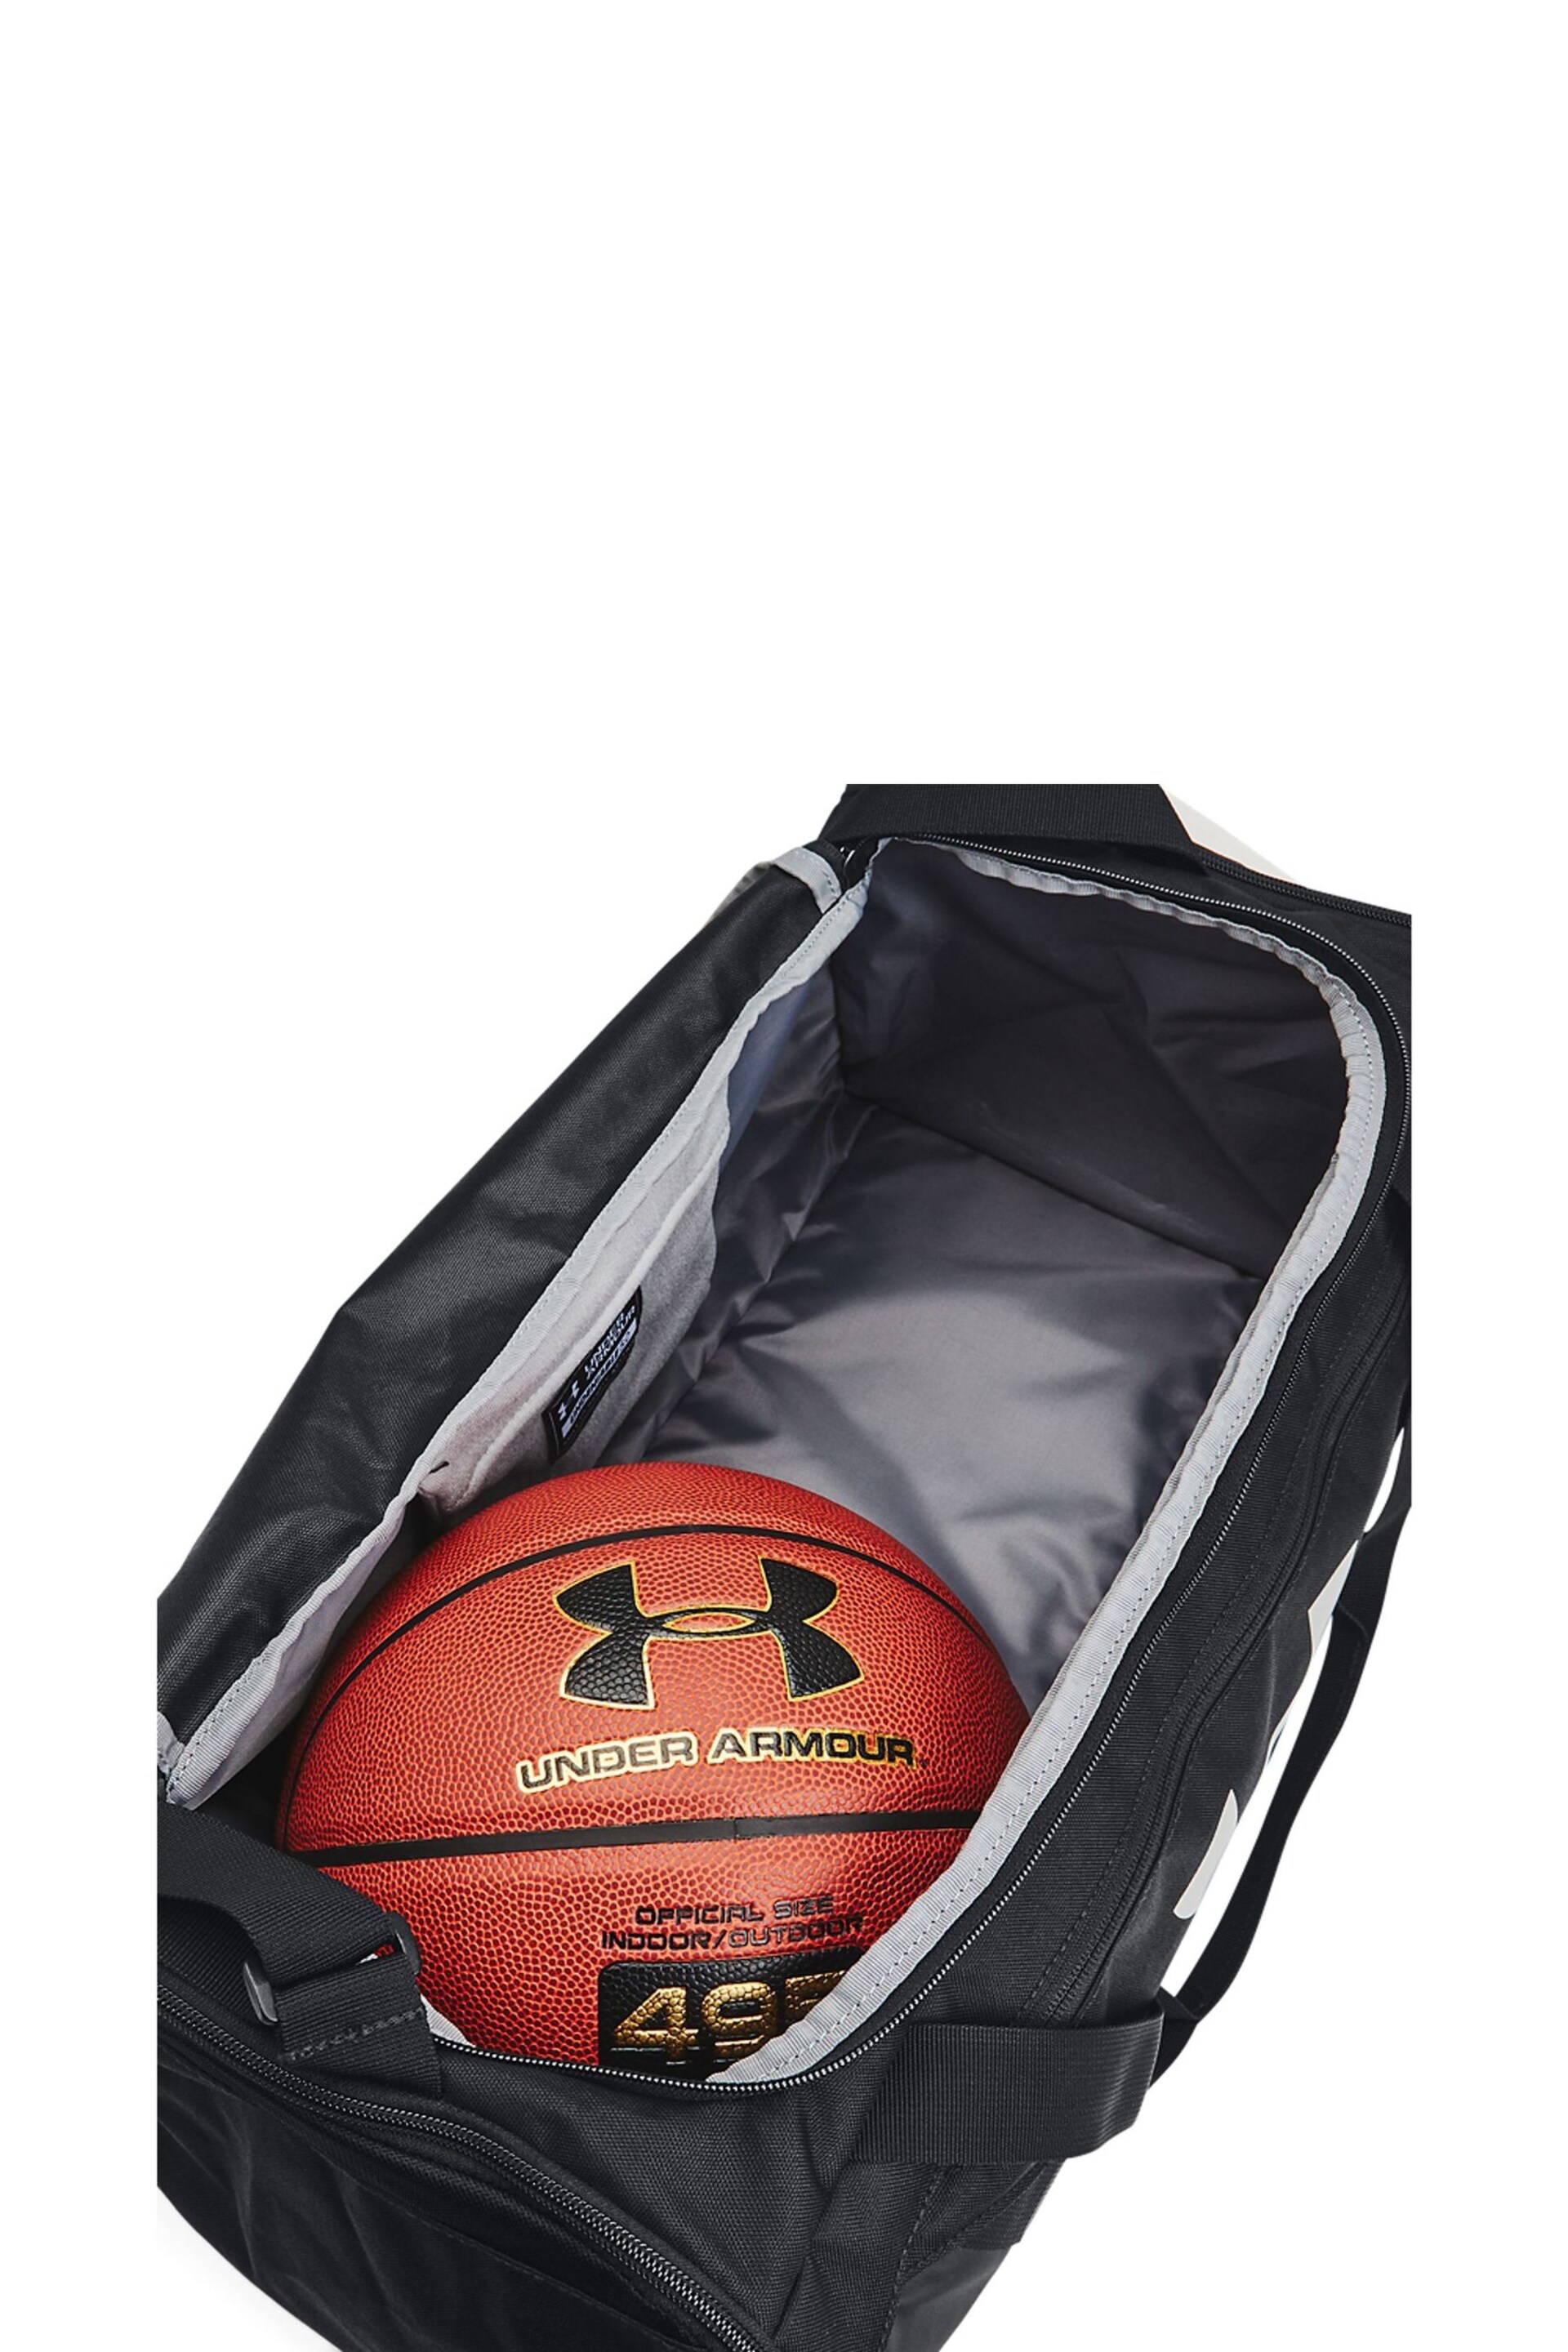 Under Armour Black Undeniable 5.0 Small Duffle Bag - Image 7 of 8